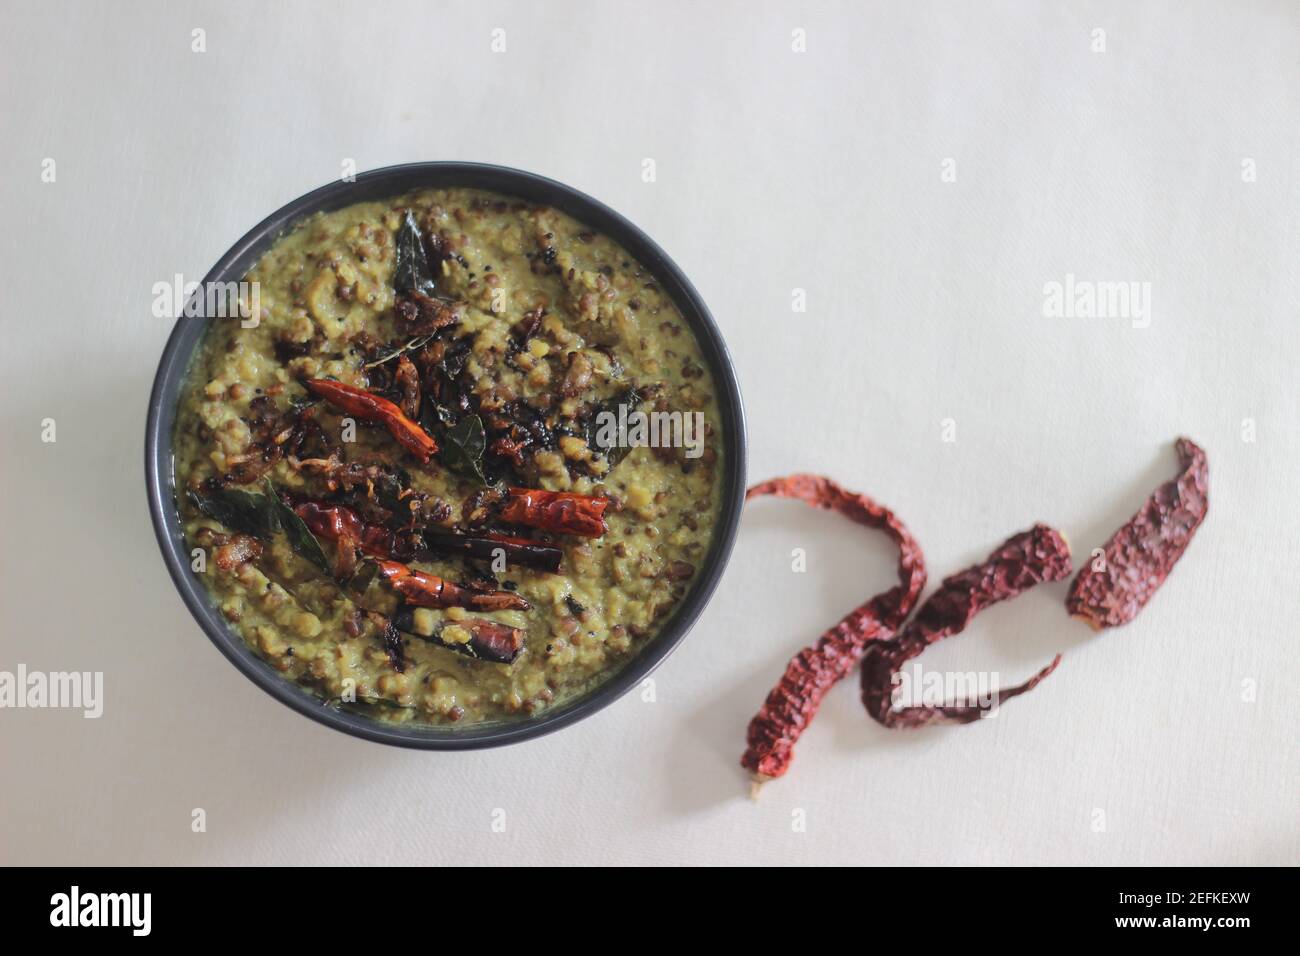 Kerala style coconut based green gram curry also called as cherupayar curry. Shot on white background Stock Photo